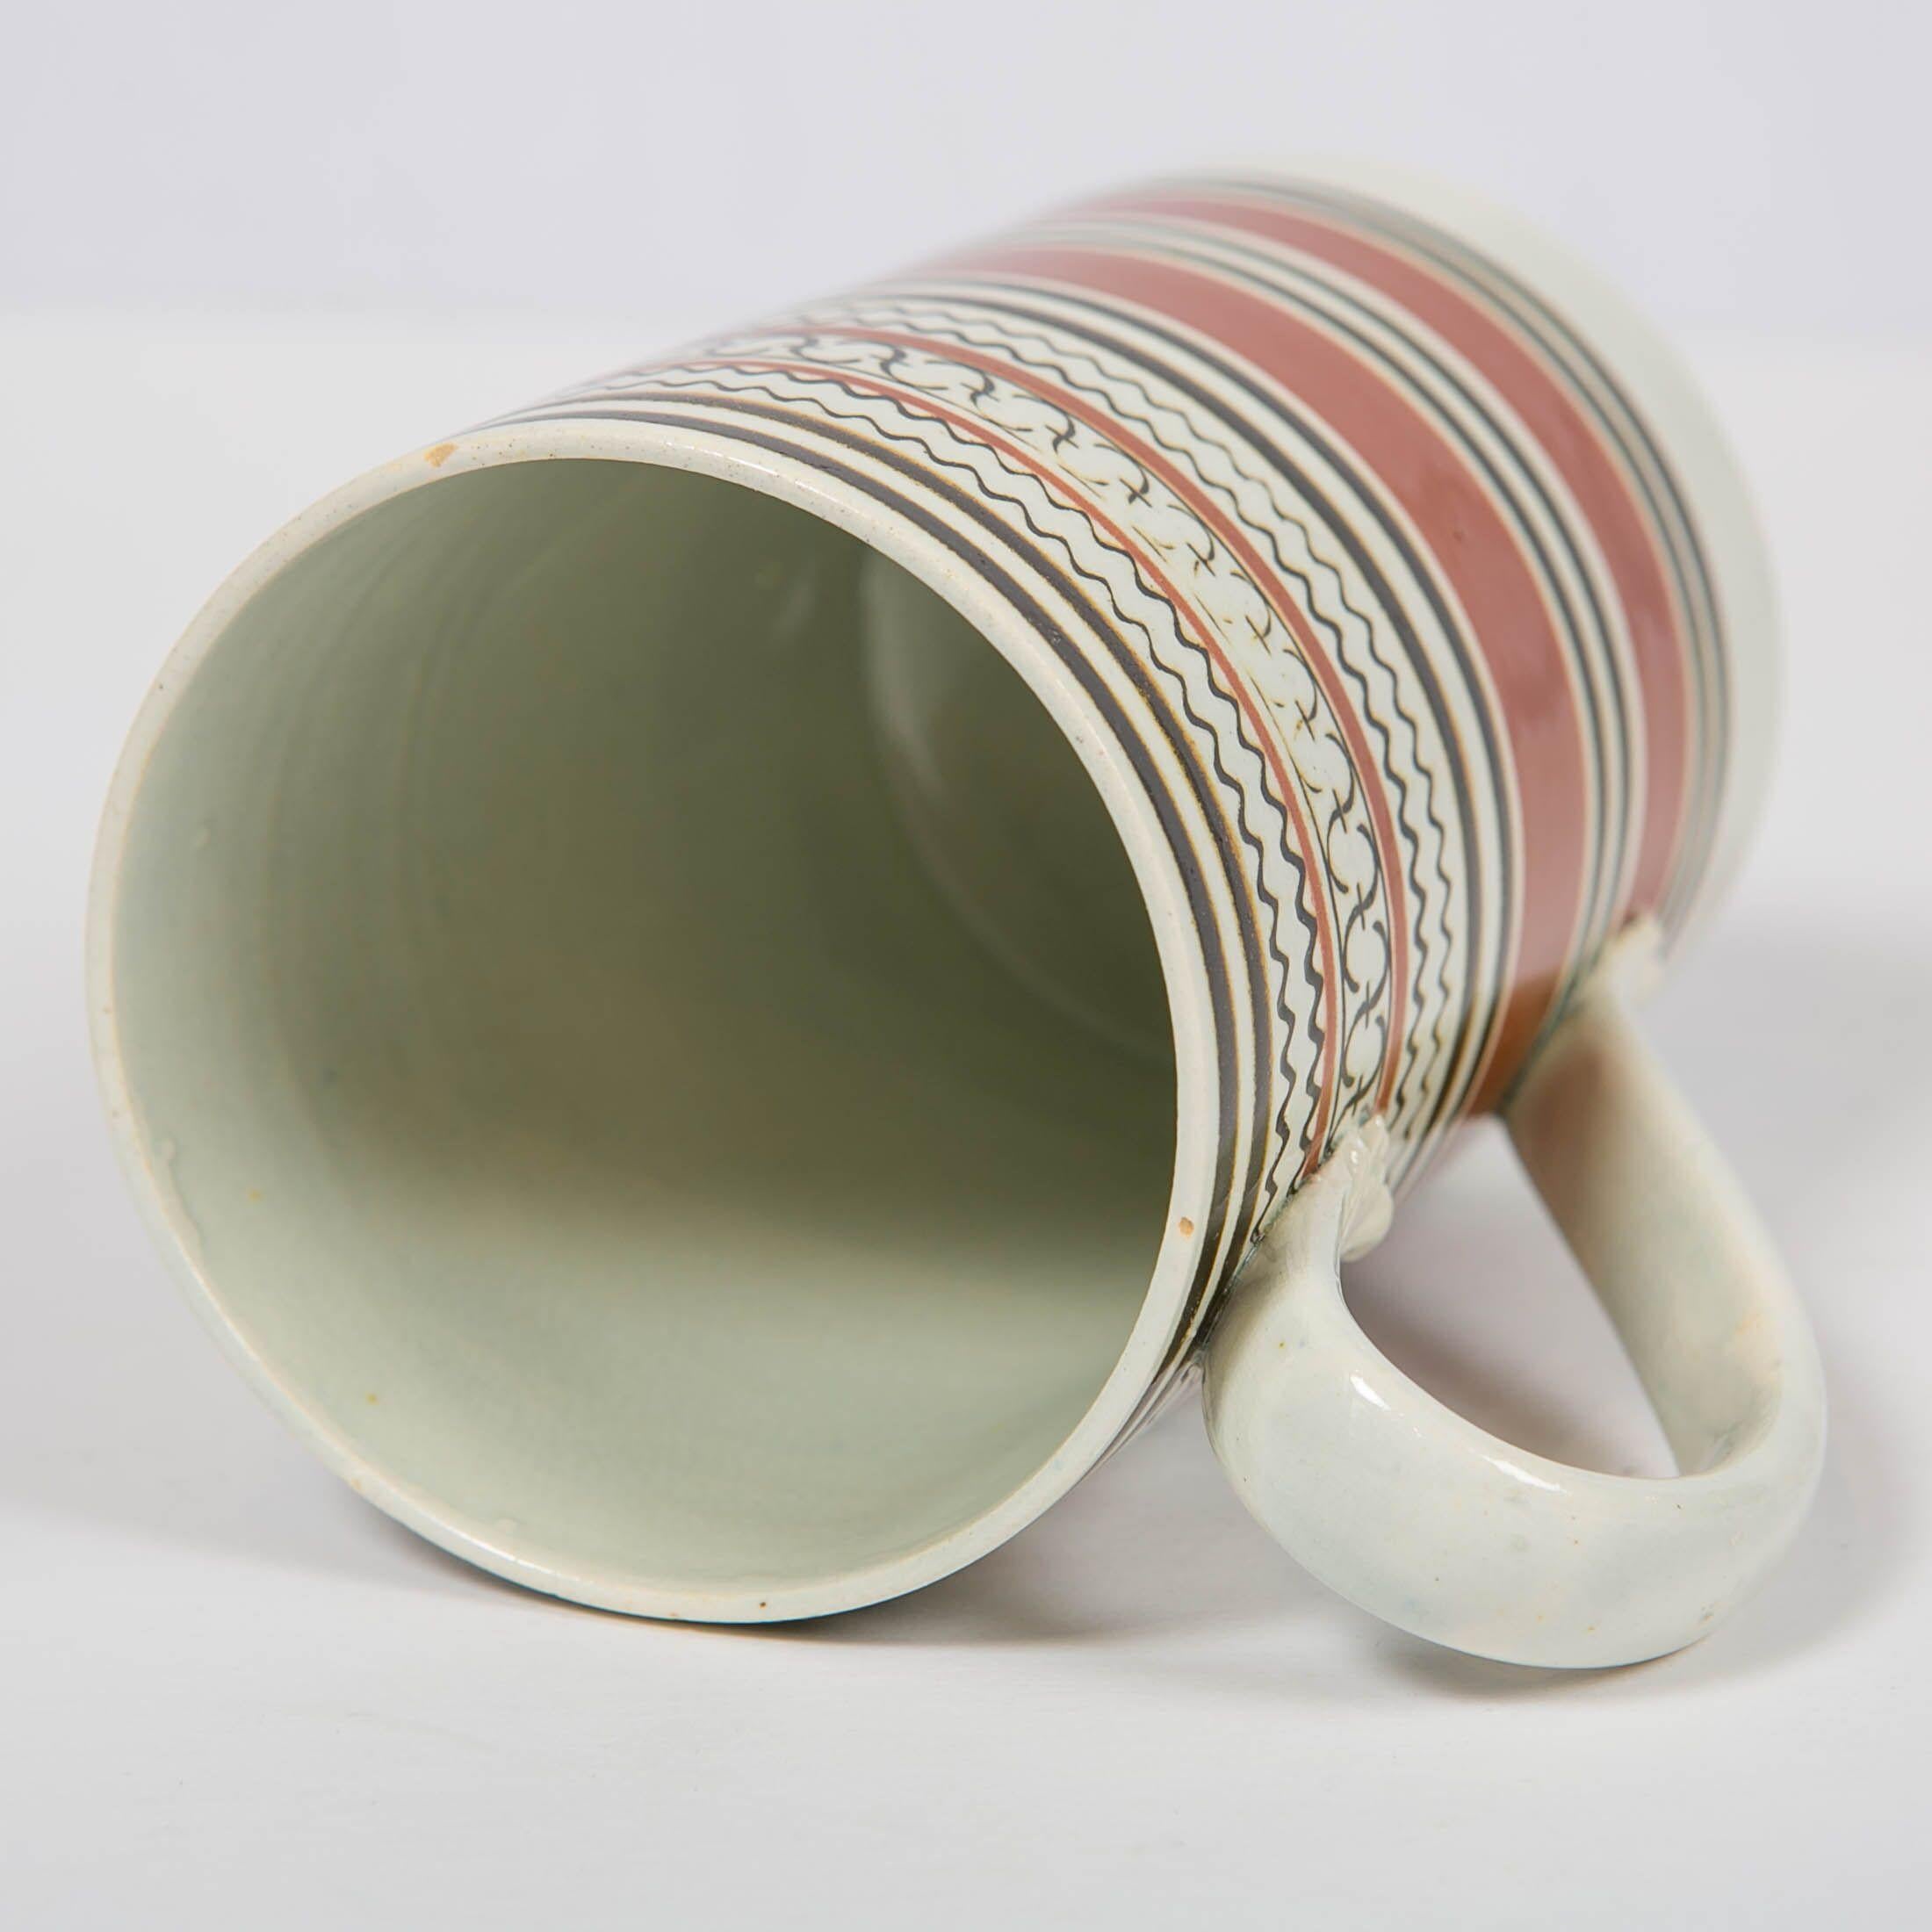 Folk Art Mochaware Mug Banded with Brown Slip Made in England, circa 1815 For Sale